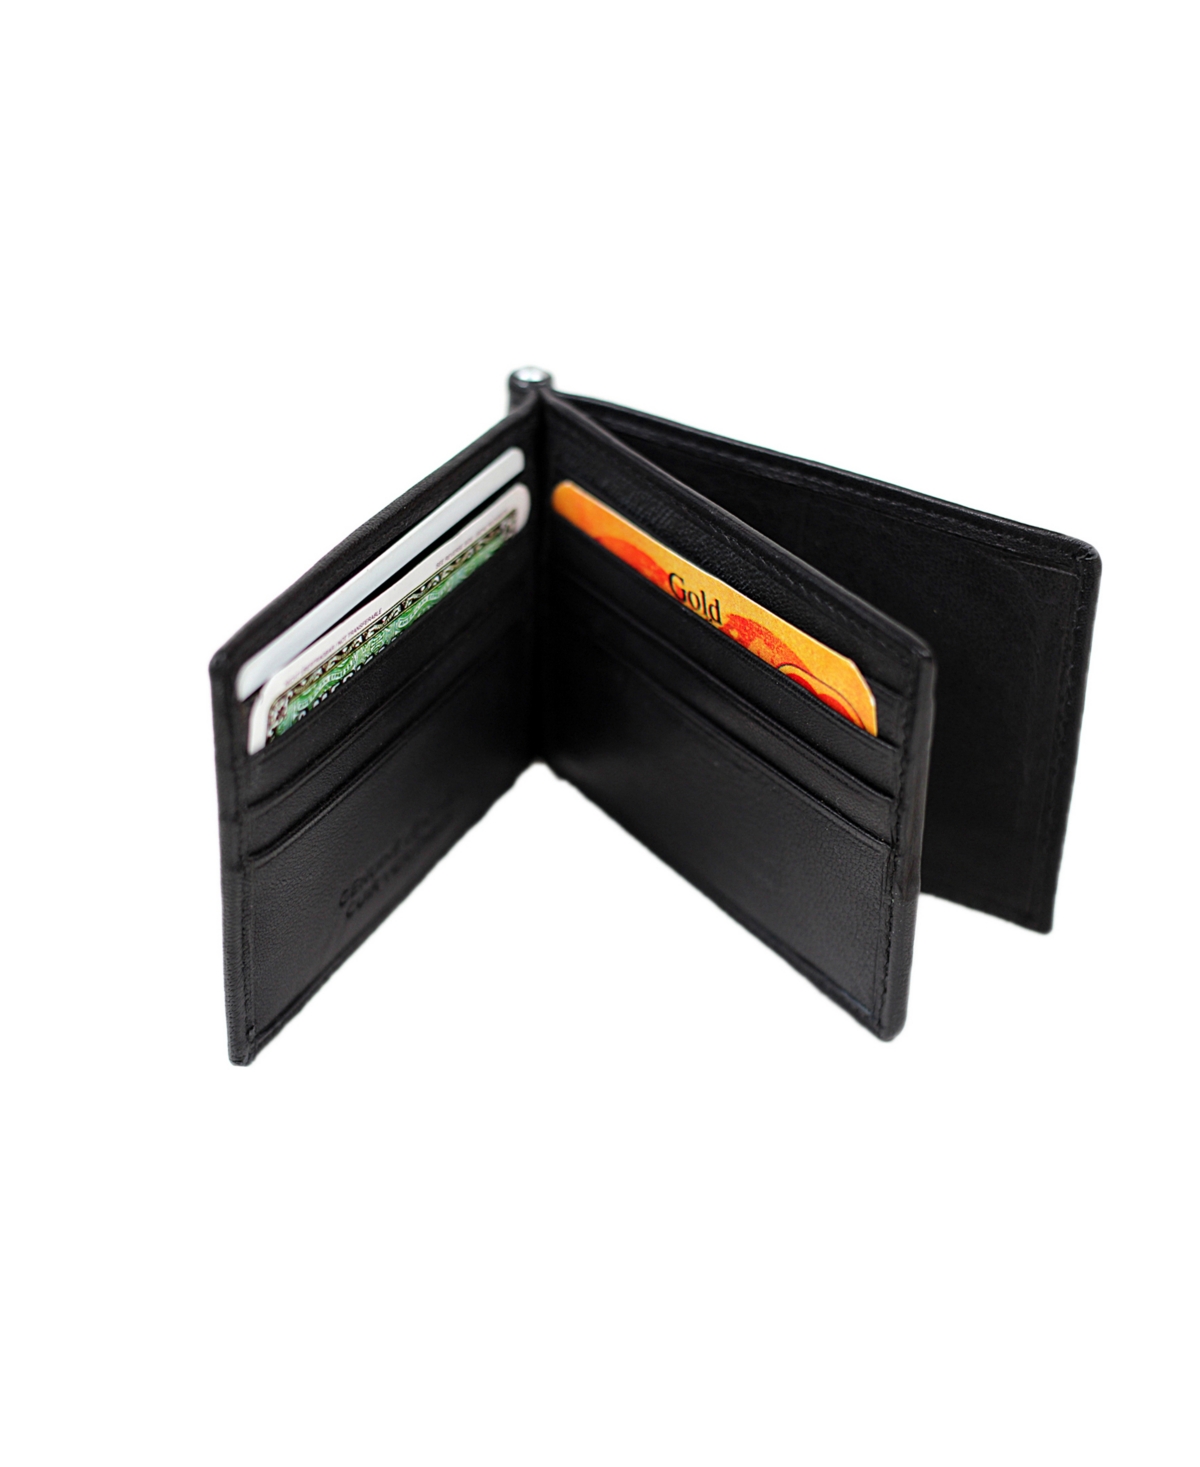 Men's Champs Genuine Leather Bill Fold Money Clip with Center Card Holder - Black